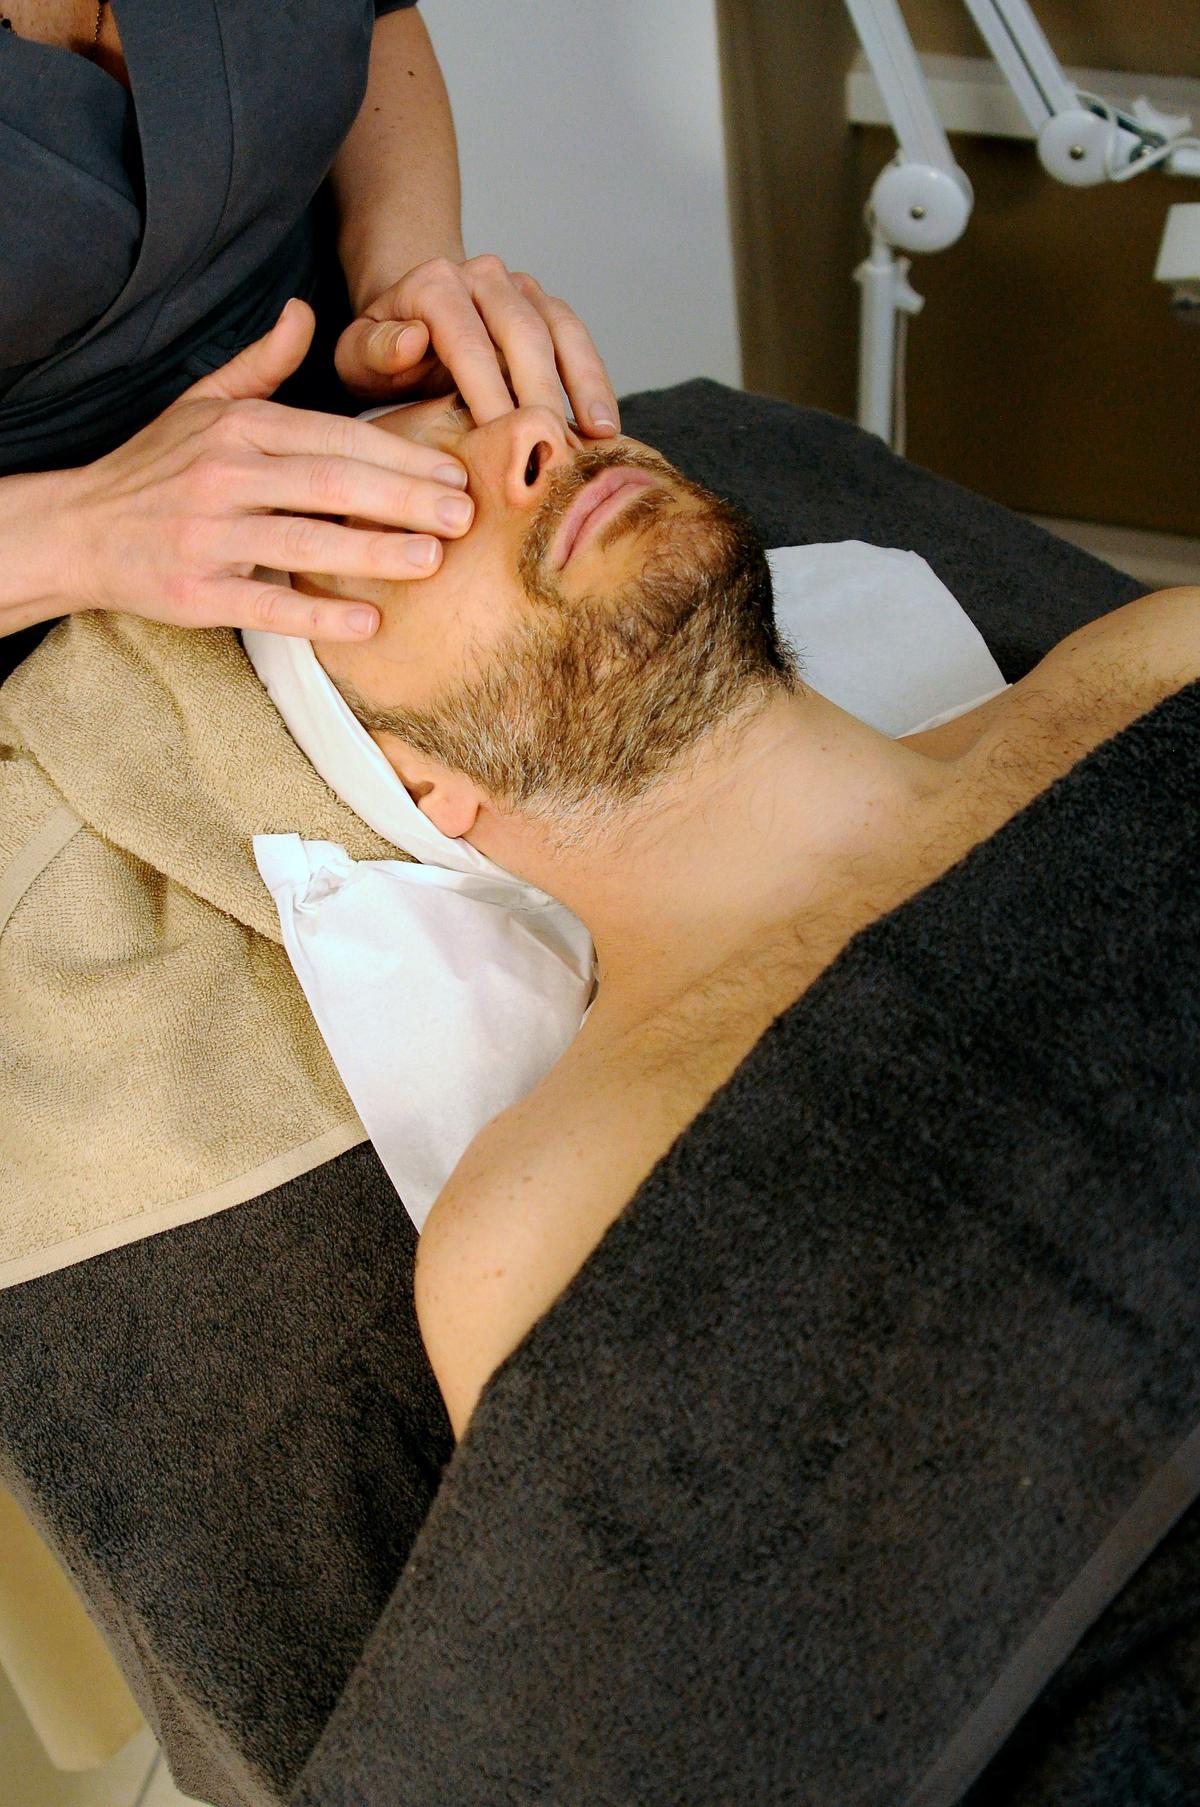 Image describing the benefits and relaxation of chiropractic care